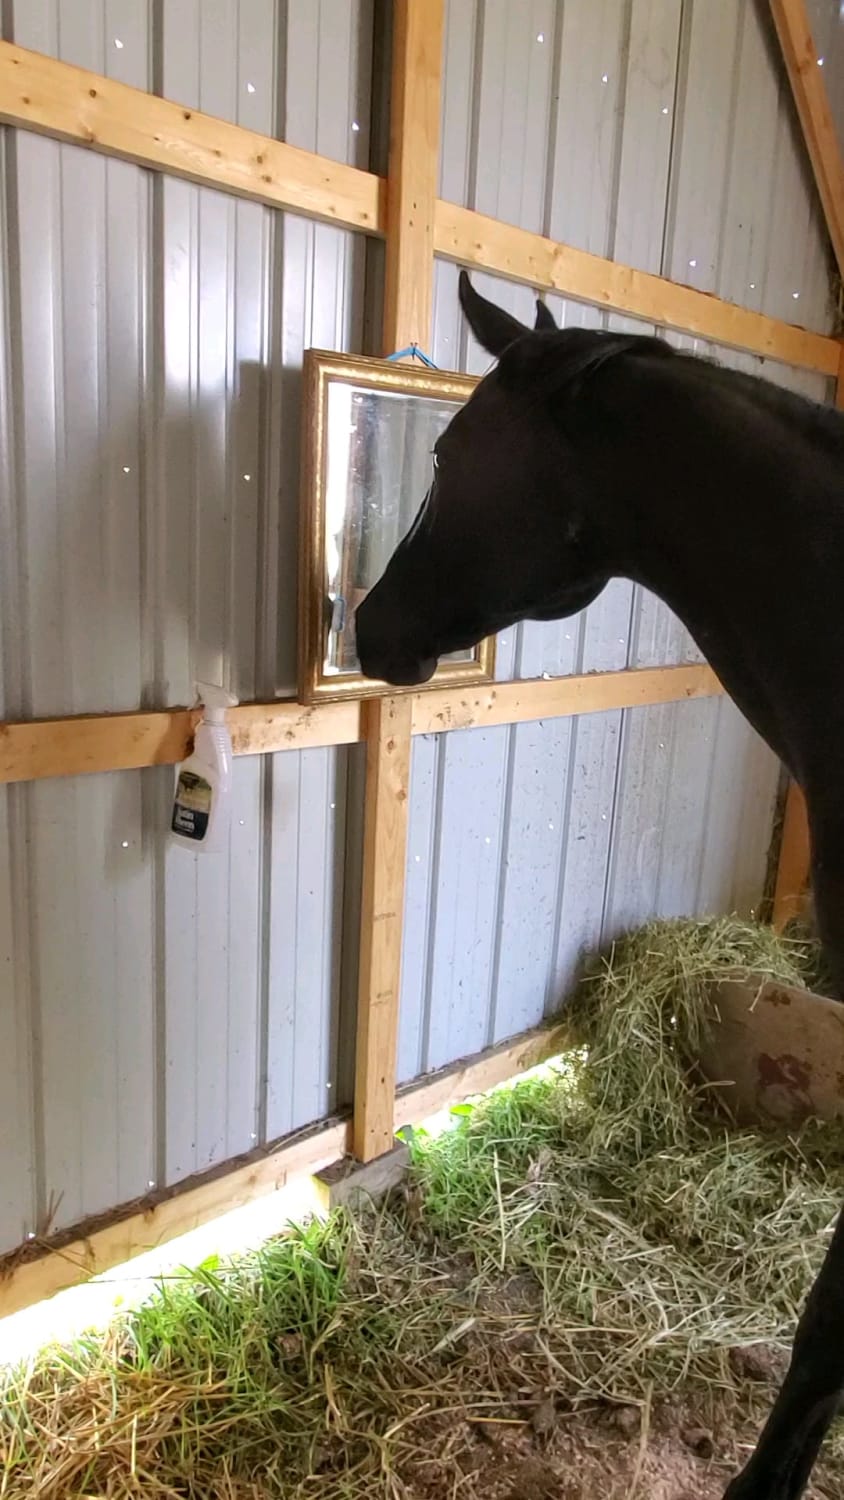 Horse discovers mirror for the first time